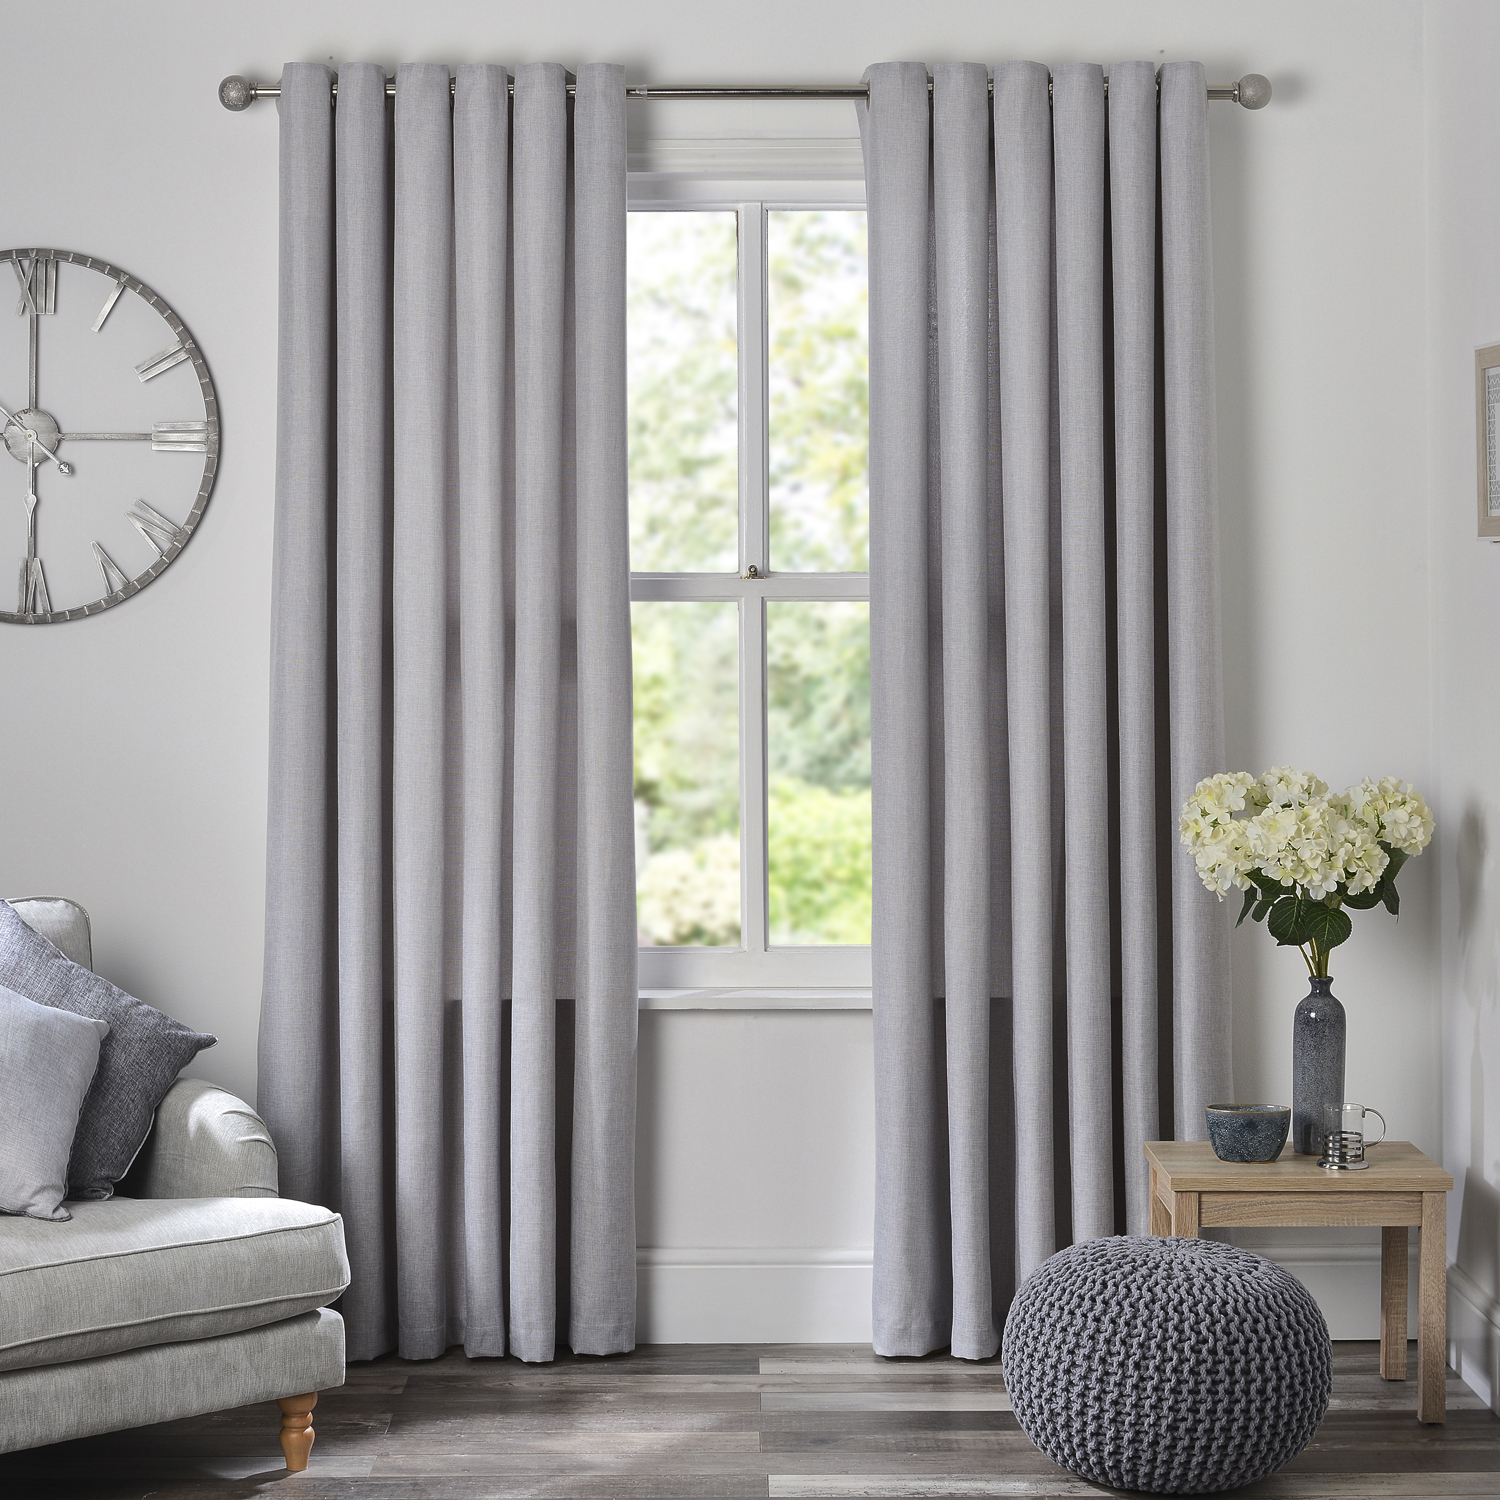 Curtains – Classic Elegance For Your Home Or Office